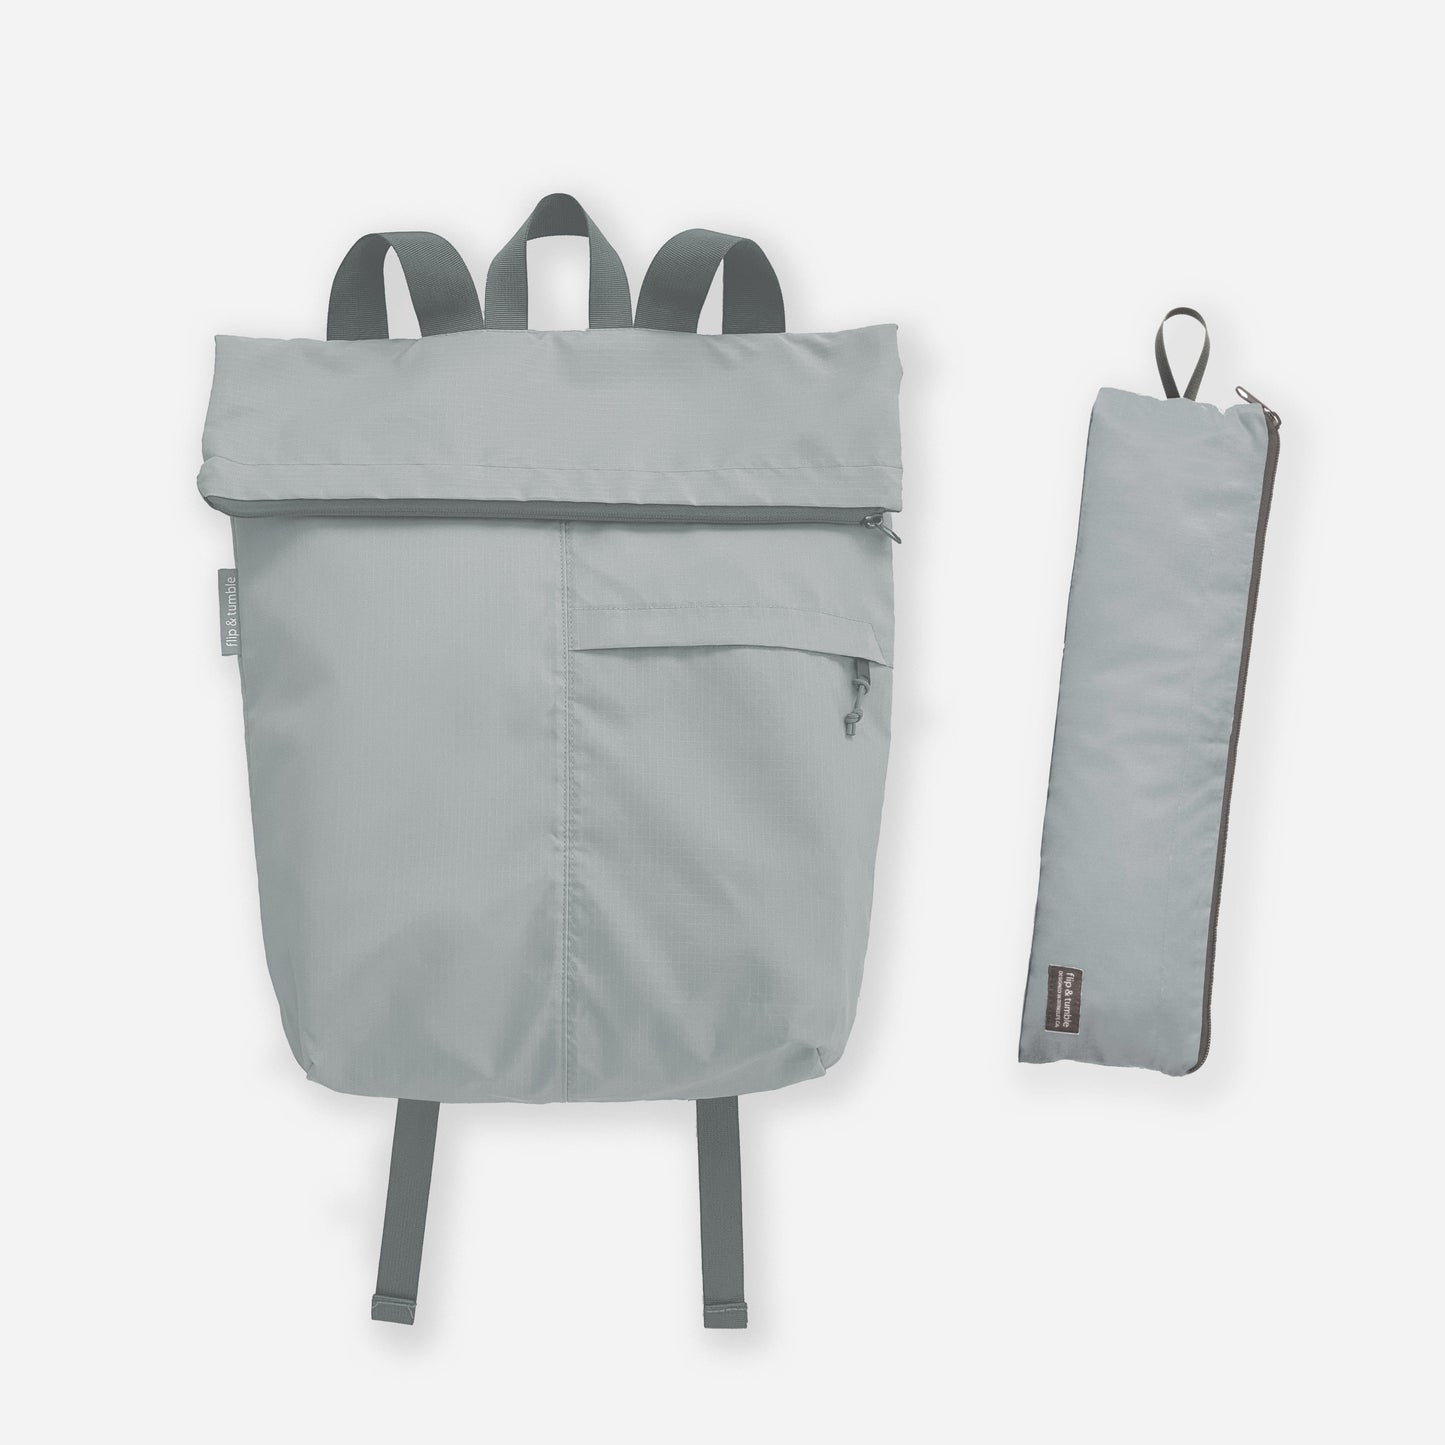 grey foldable backpack for travel - flip & tumble - best packable backpack for travel, this packable foldable rucksack style is great for travel